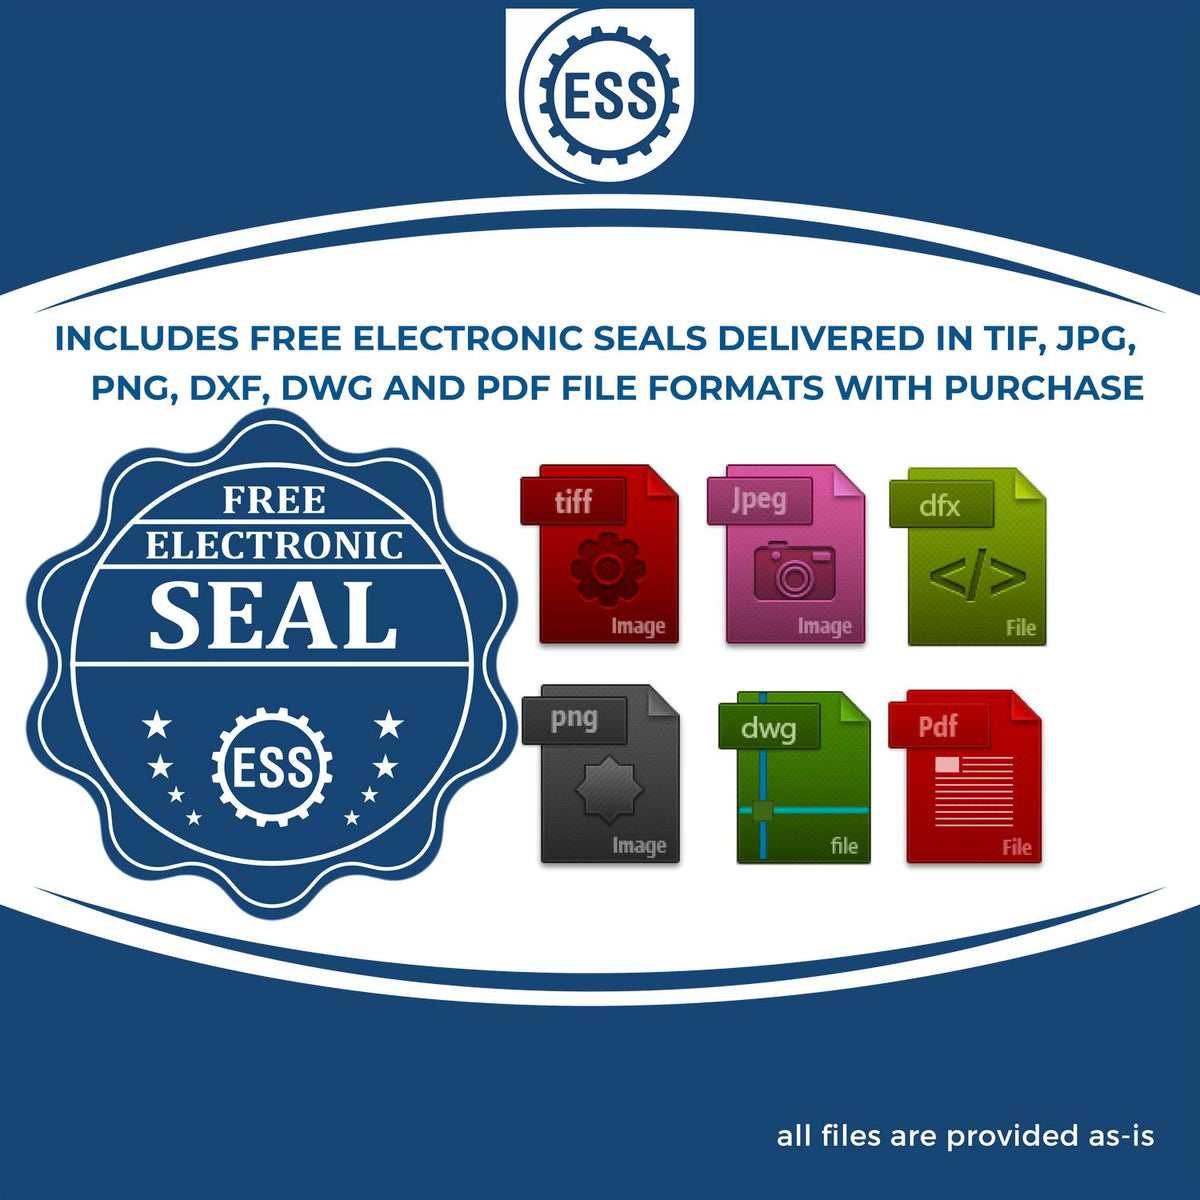 An infographic for the free electronic seal for the Handheld Massachusetts Land Surveyor Seal illustrating the different file type icons such as DXF, DWG, TIF, JPG and PNG.